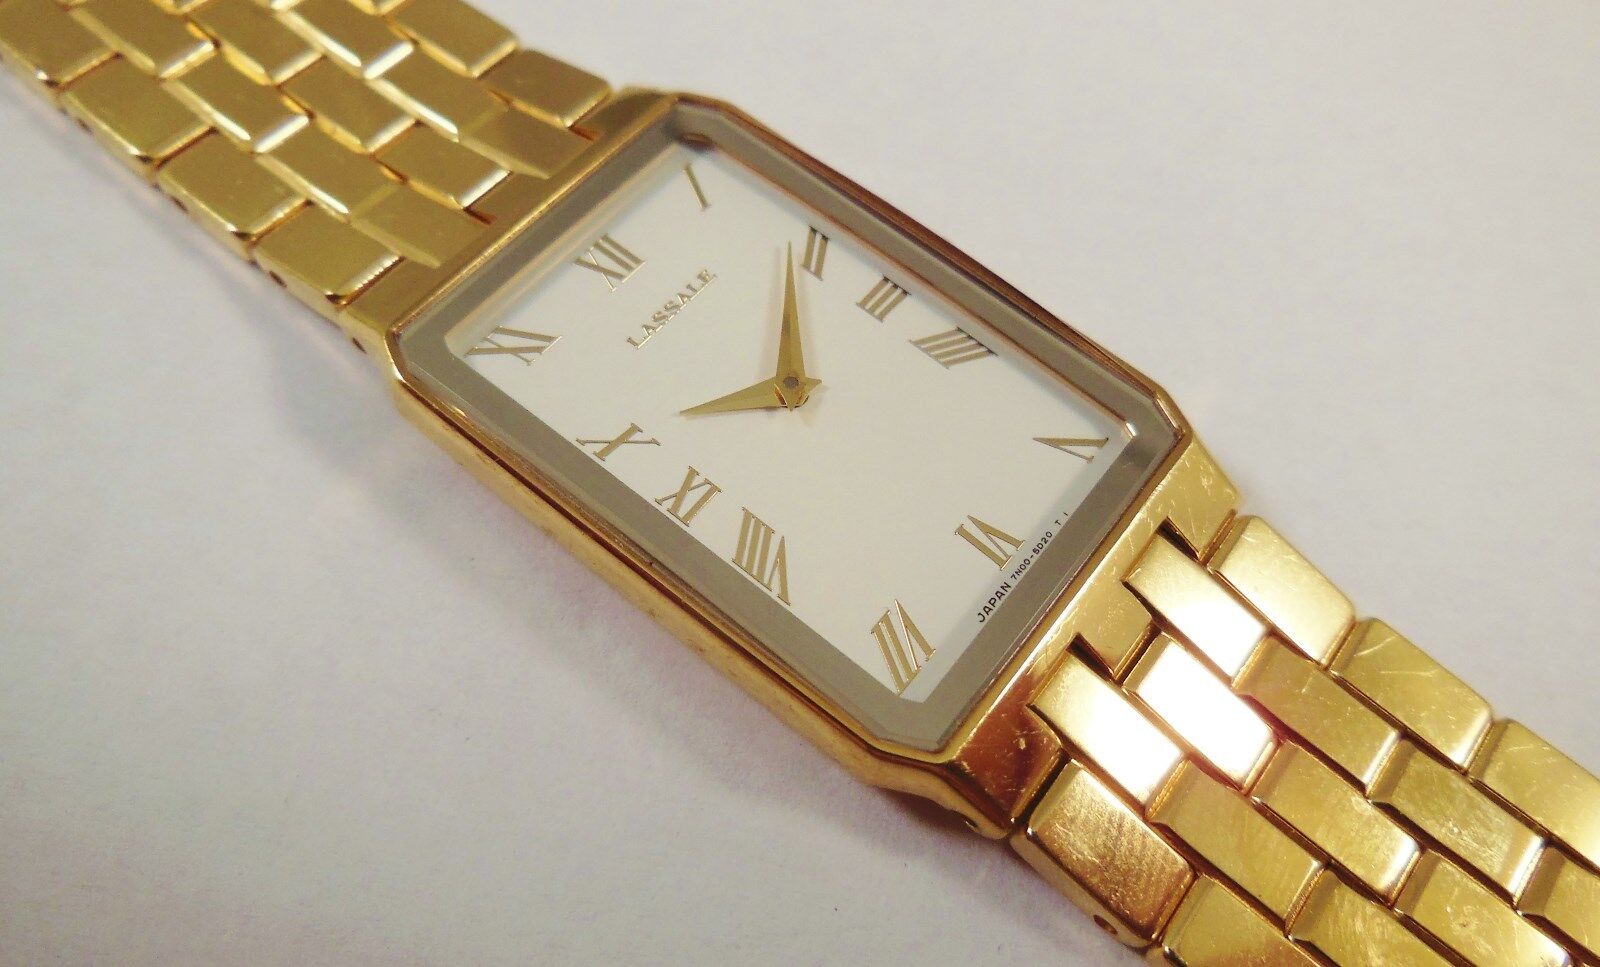 Lassale by Seiko Gold Tone Stainless Steel 7N00-5D20 Sample Watch NON-WORKING 